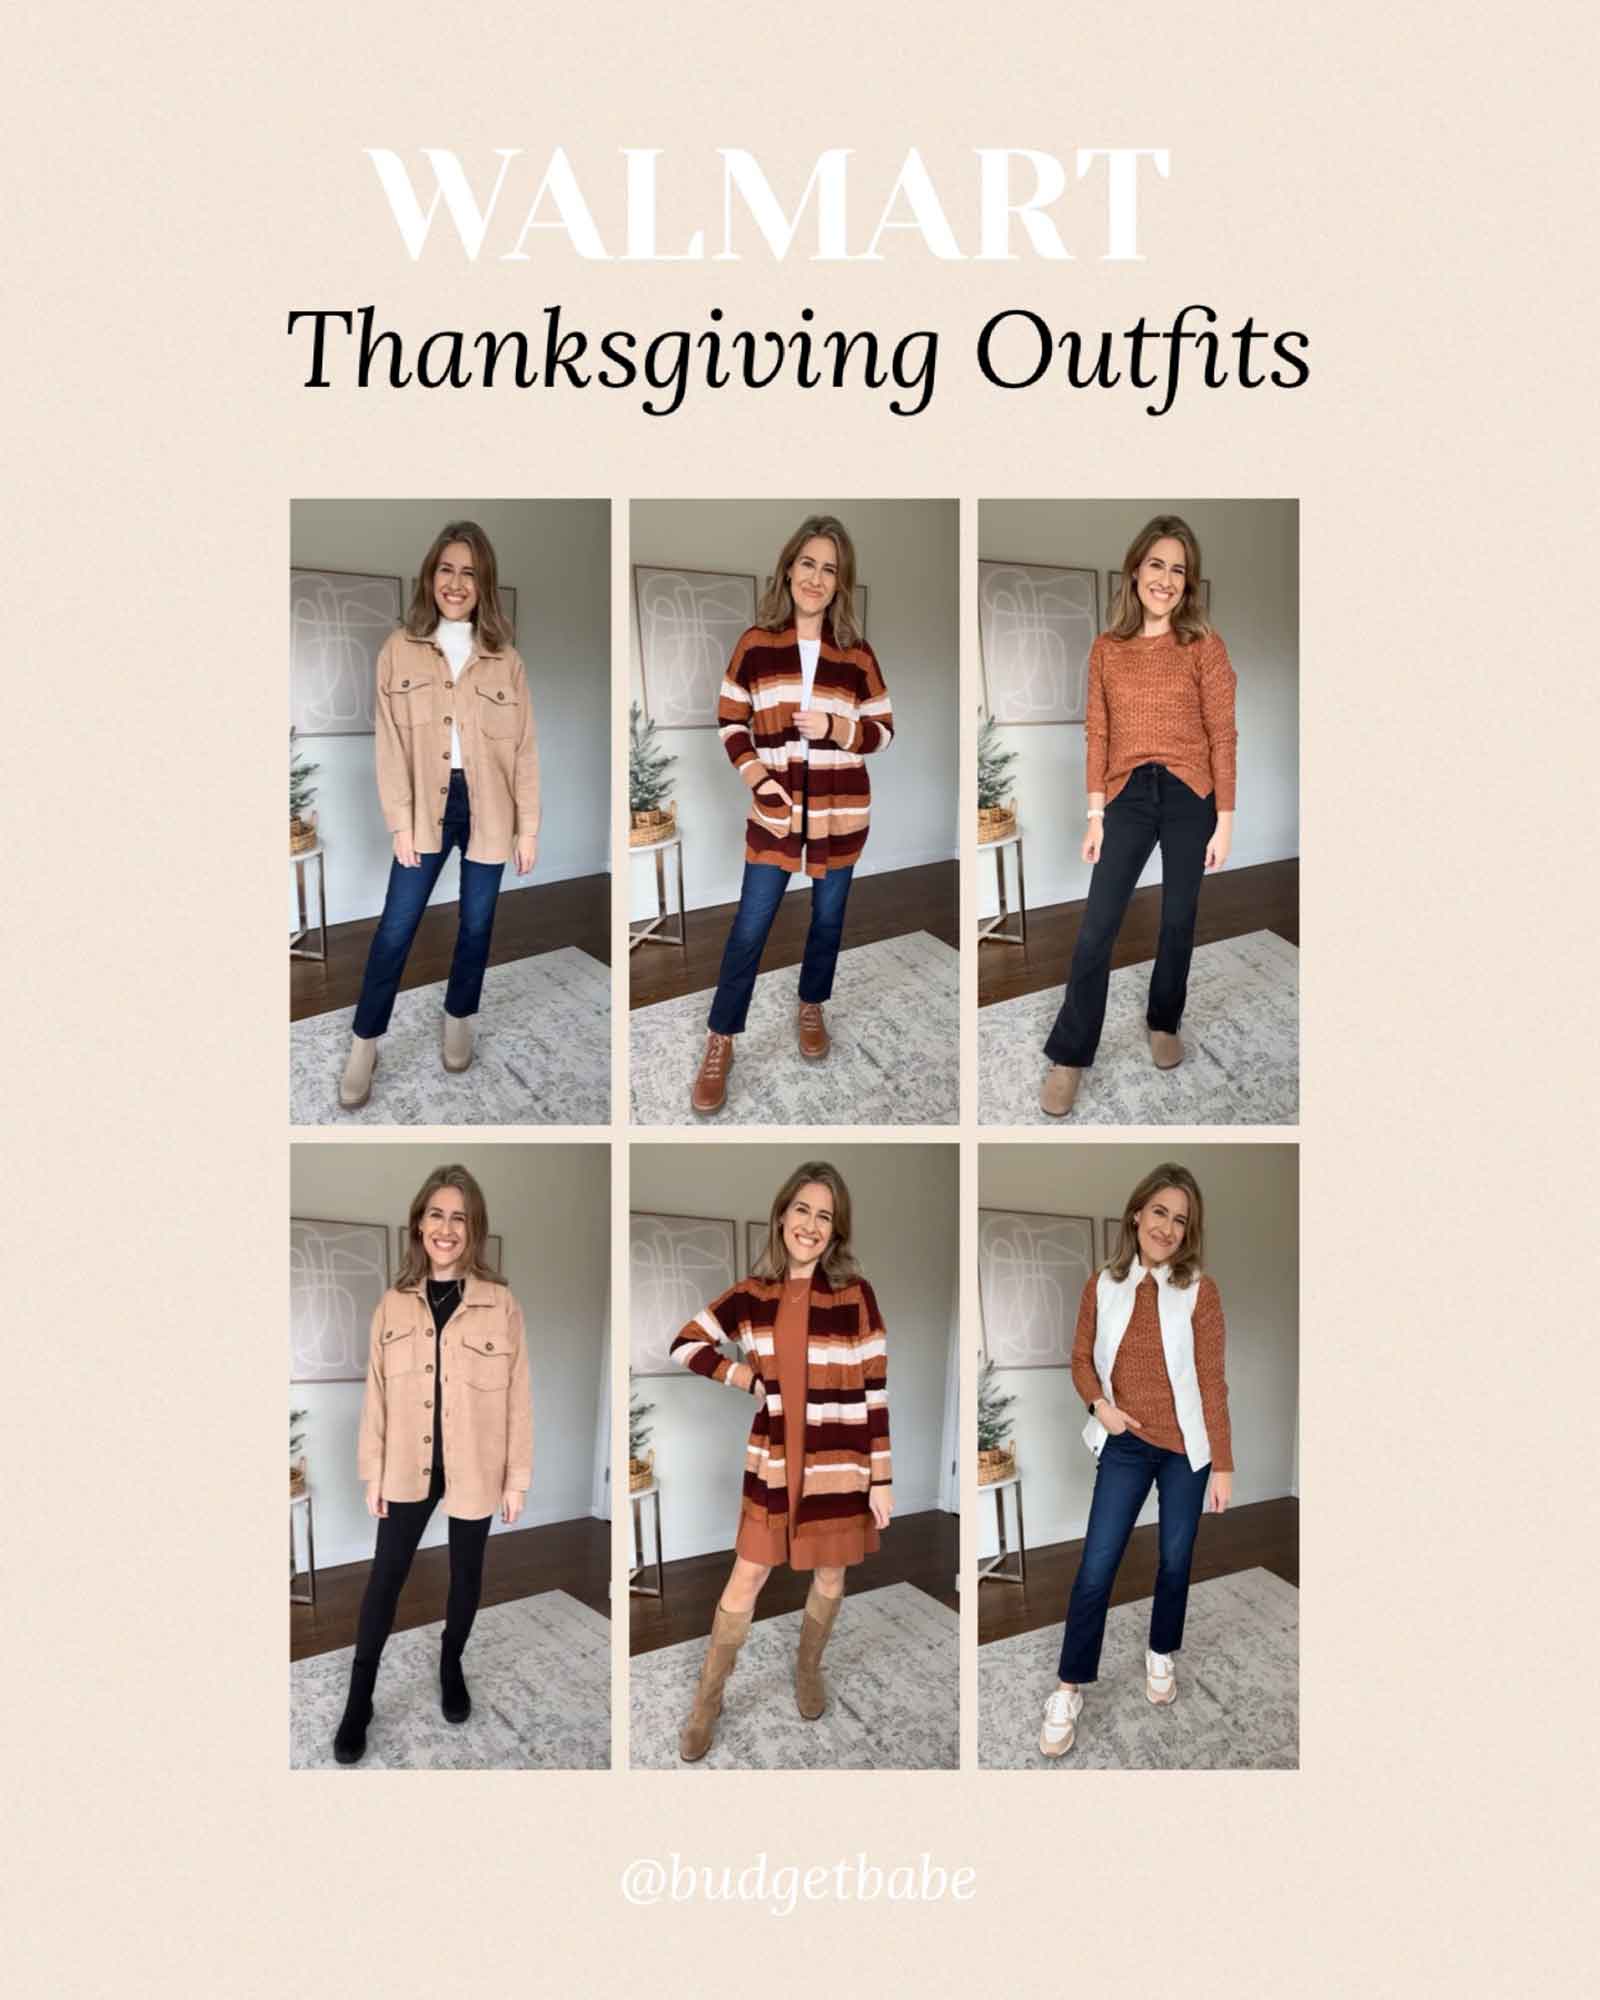 Walmart Thanksgiving Outfits